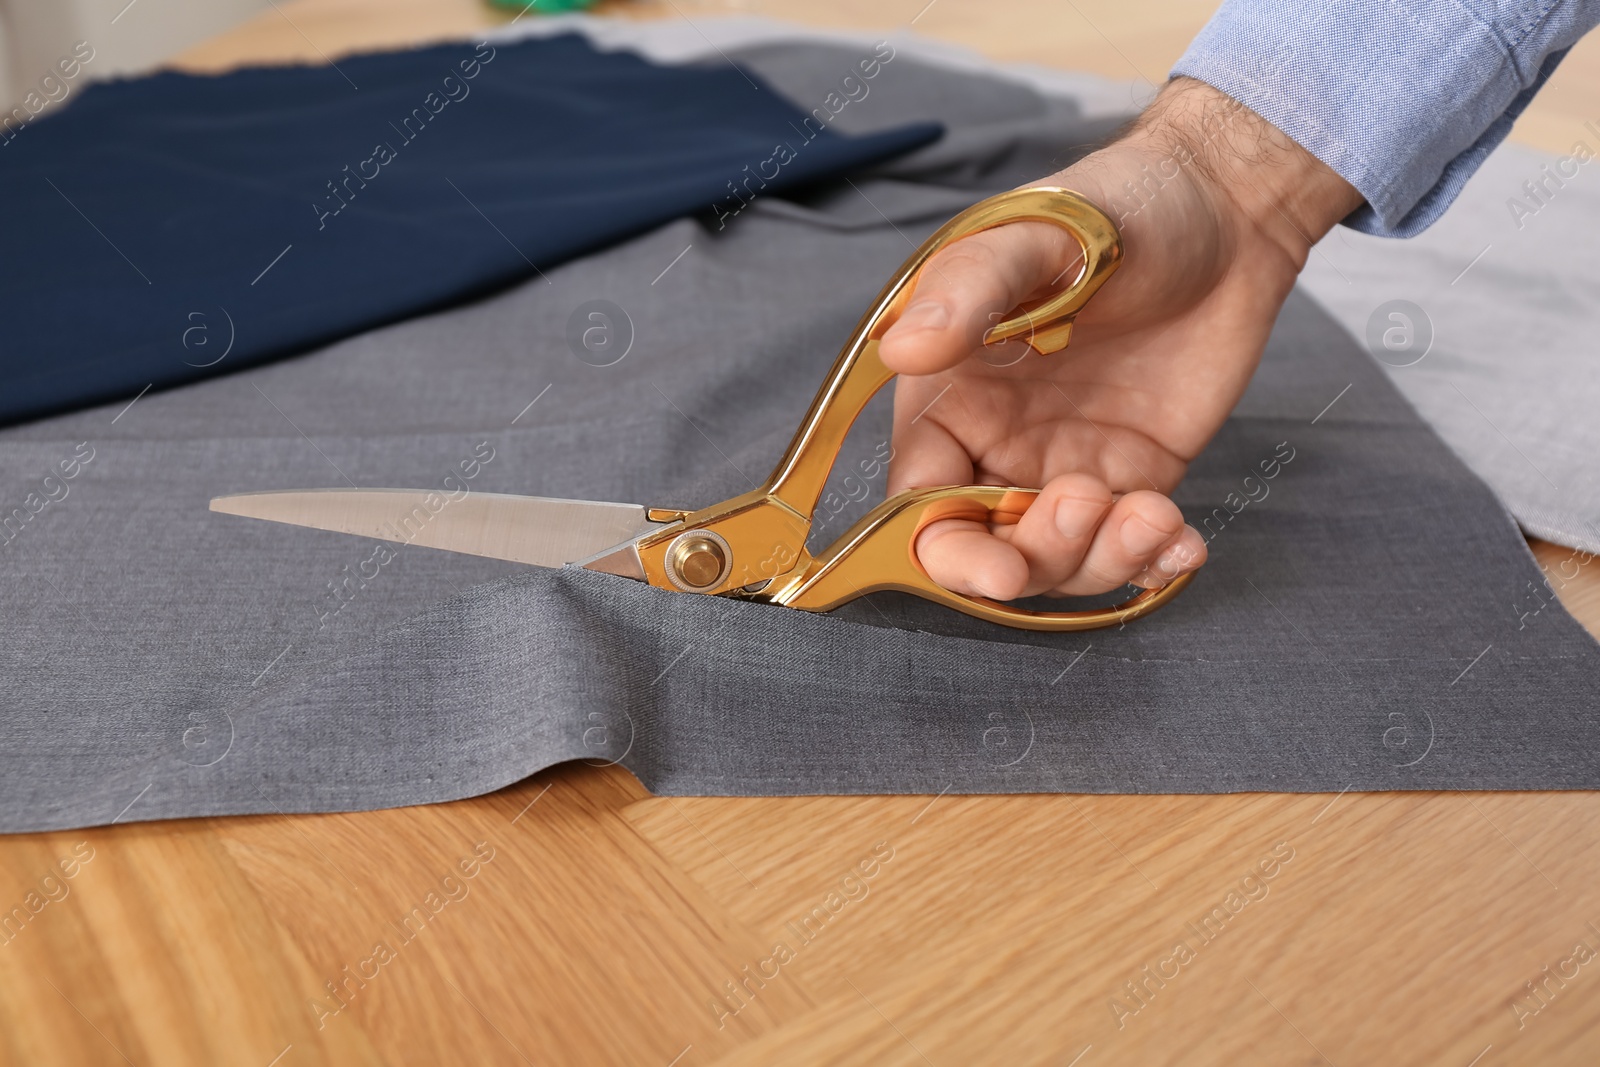 Photo of Man cutting grey fabric with scissors at wooden table, closeup